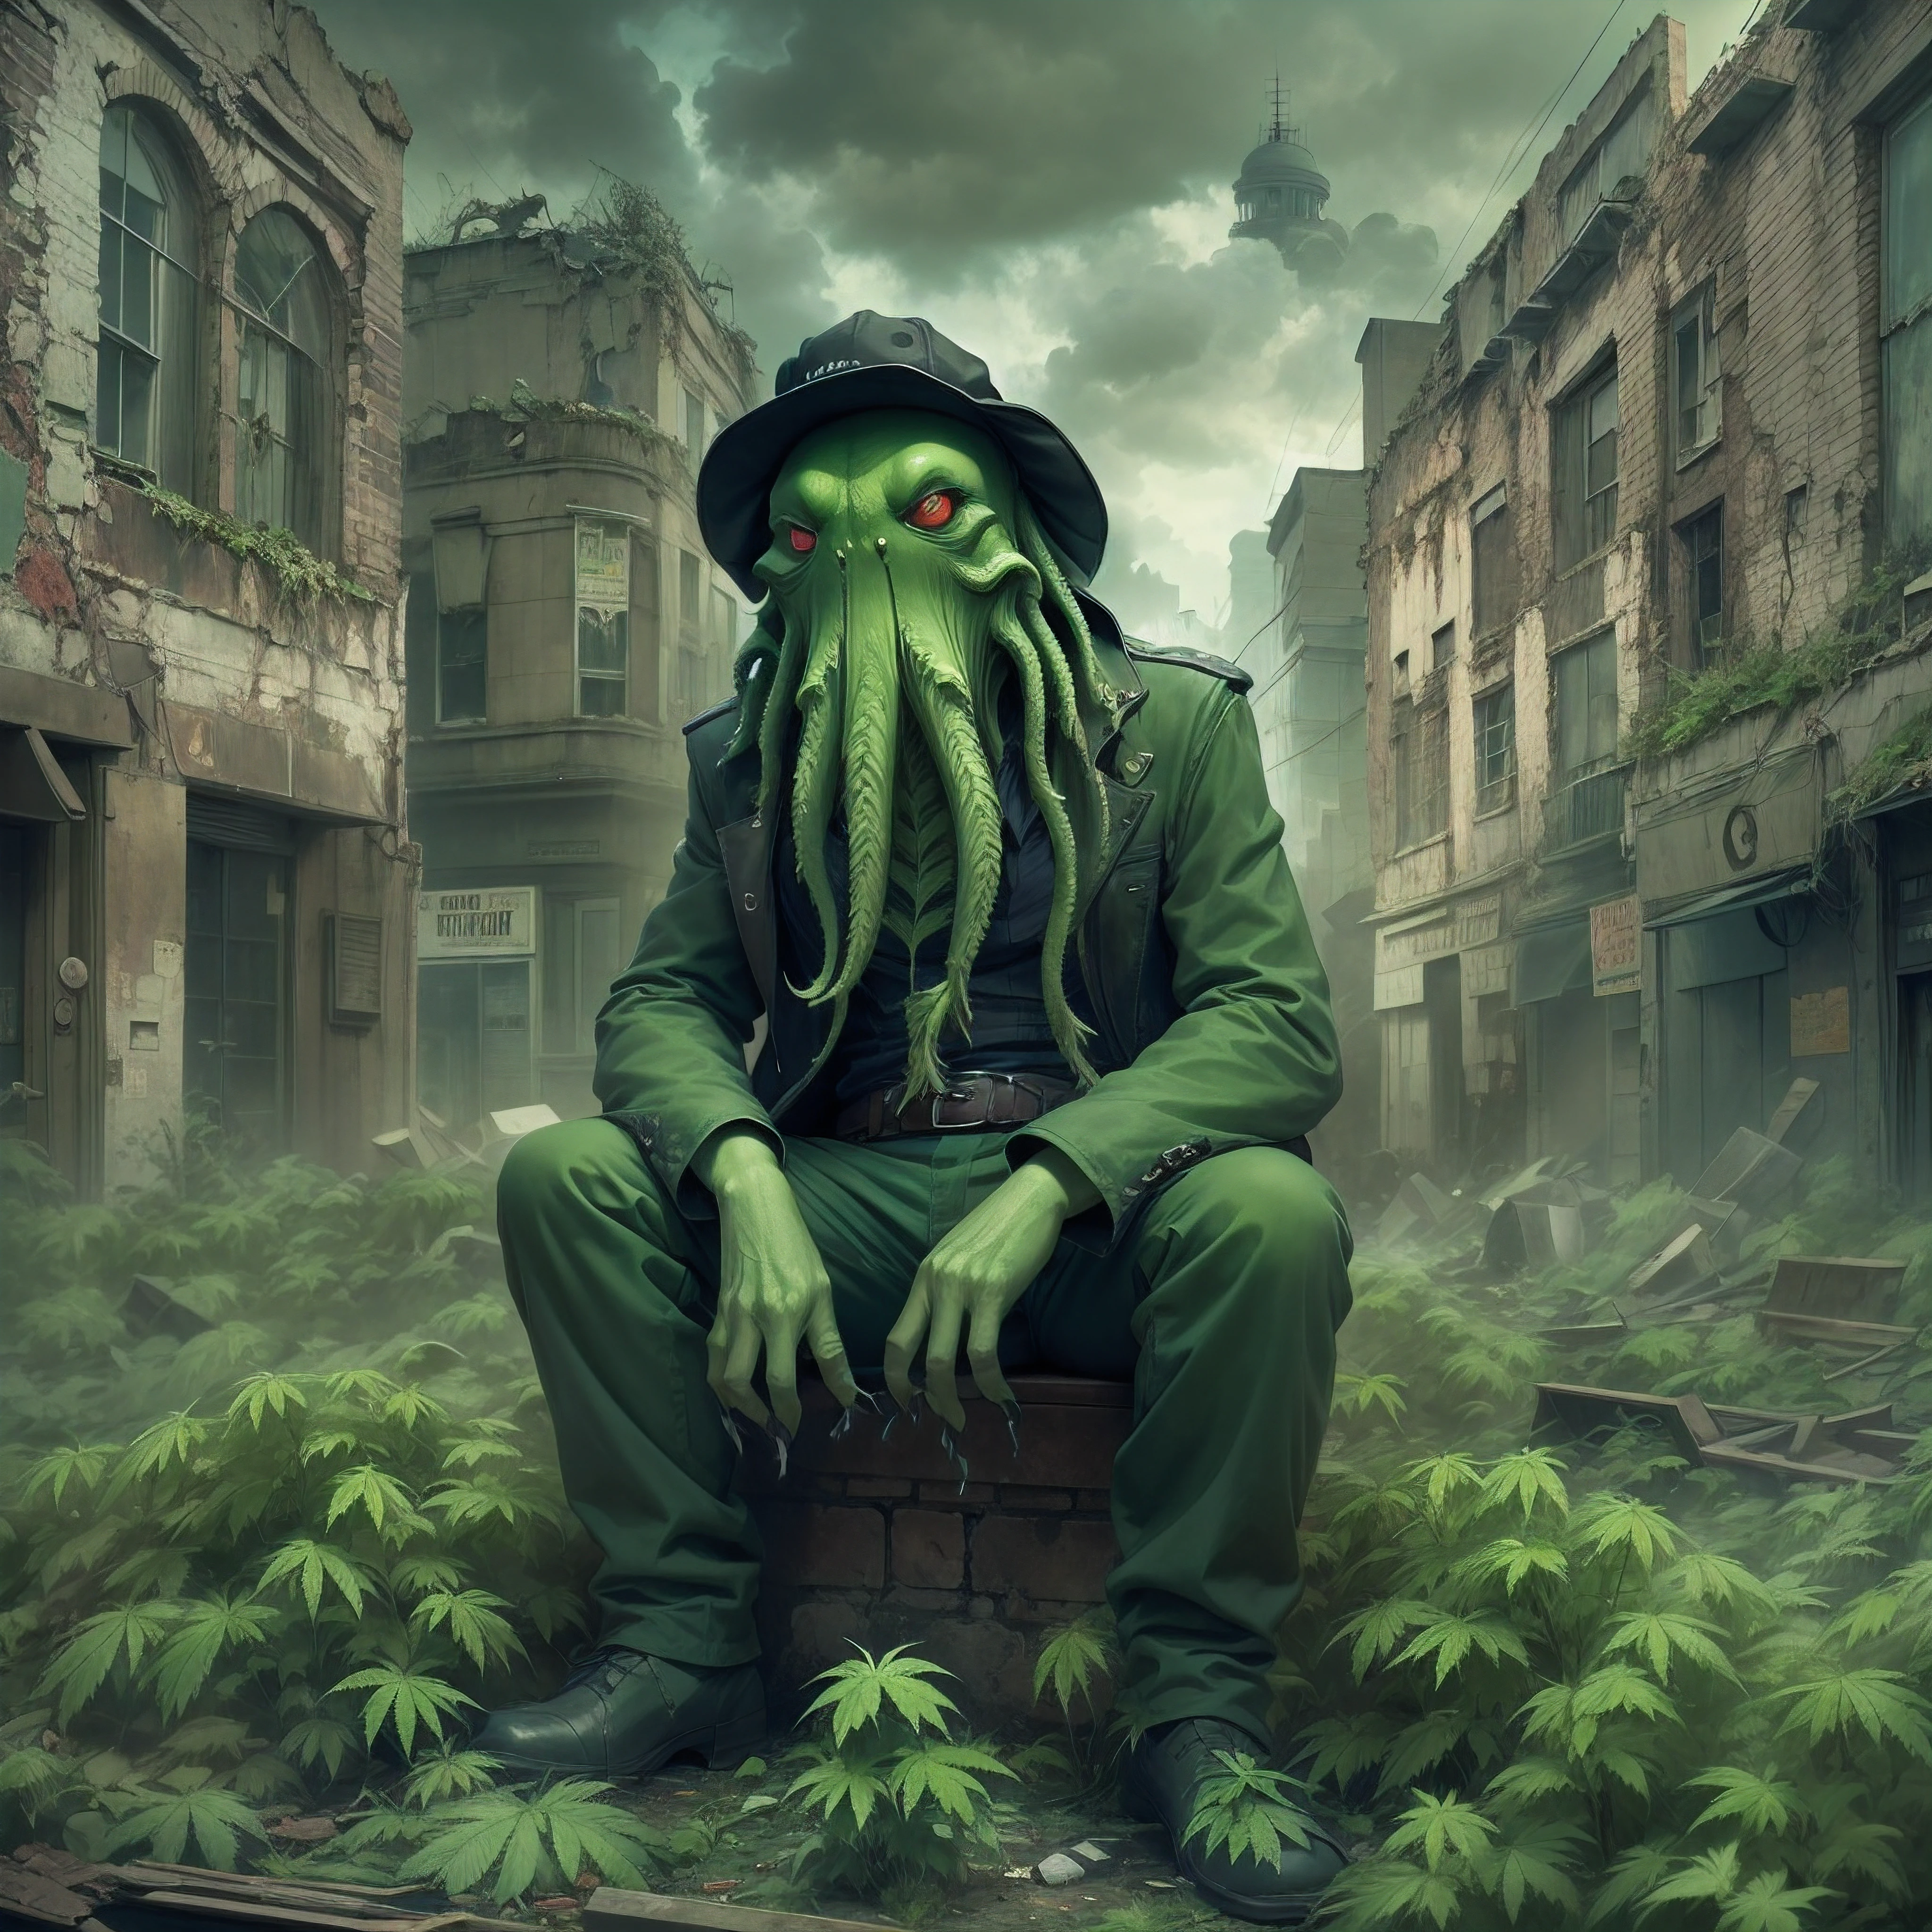 Cthulhu covered in marijuana wearing a BLACK flat cap hat is SMOKING MARIJUANA in the middle of the abandoned city